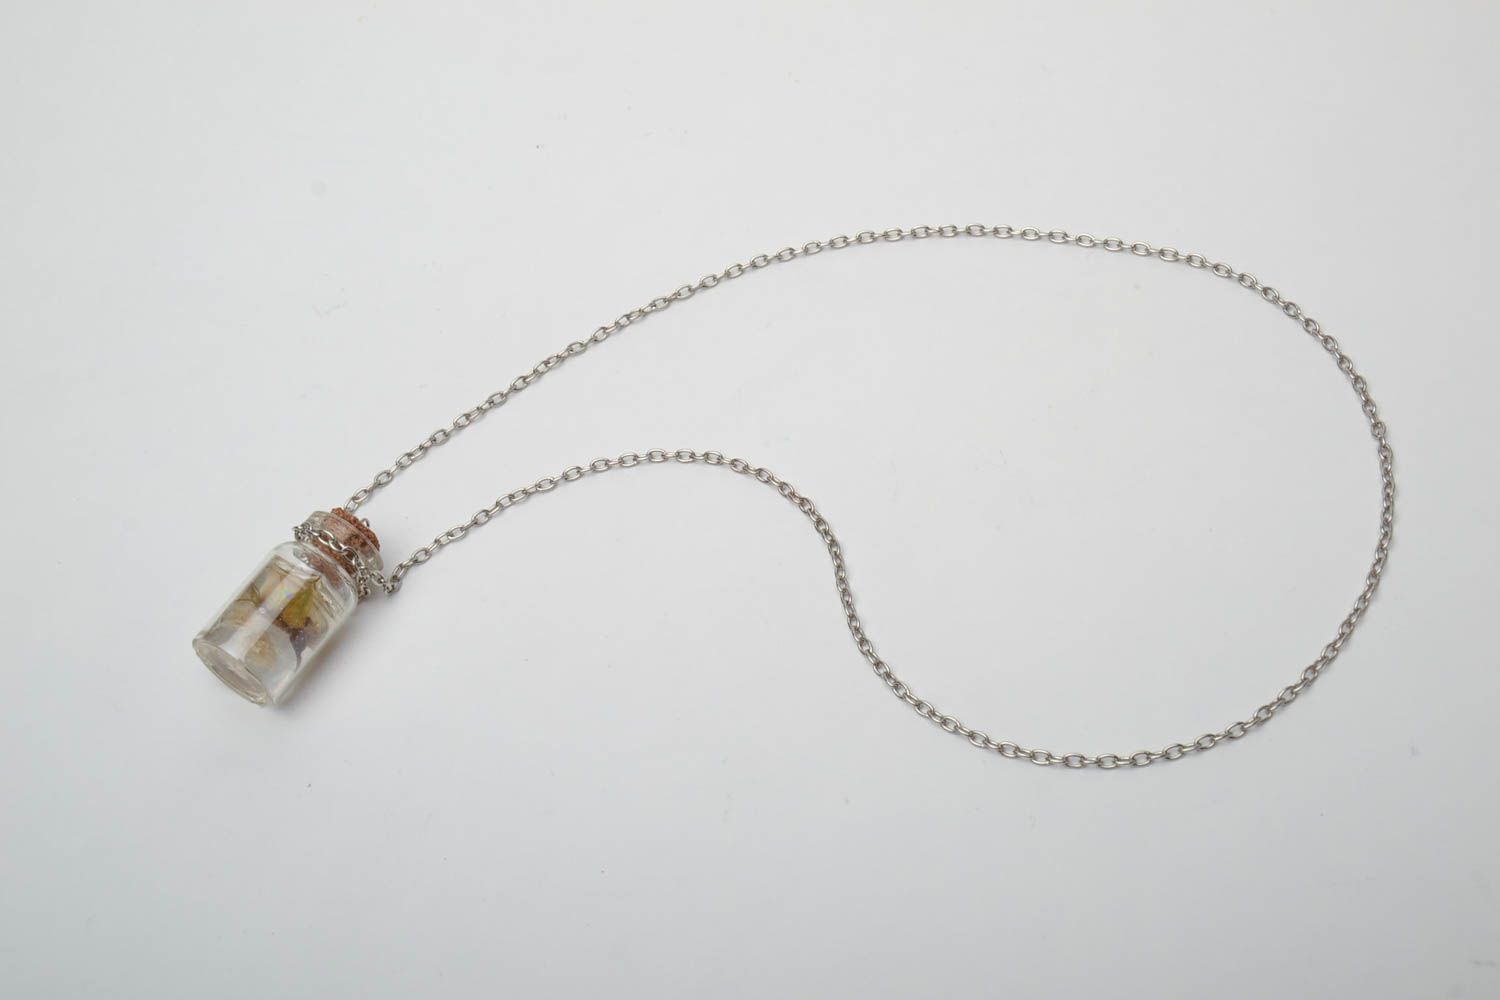 Interior pendant Bottle with Chain photo 5